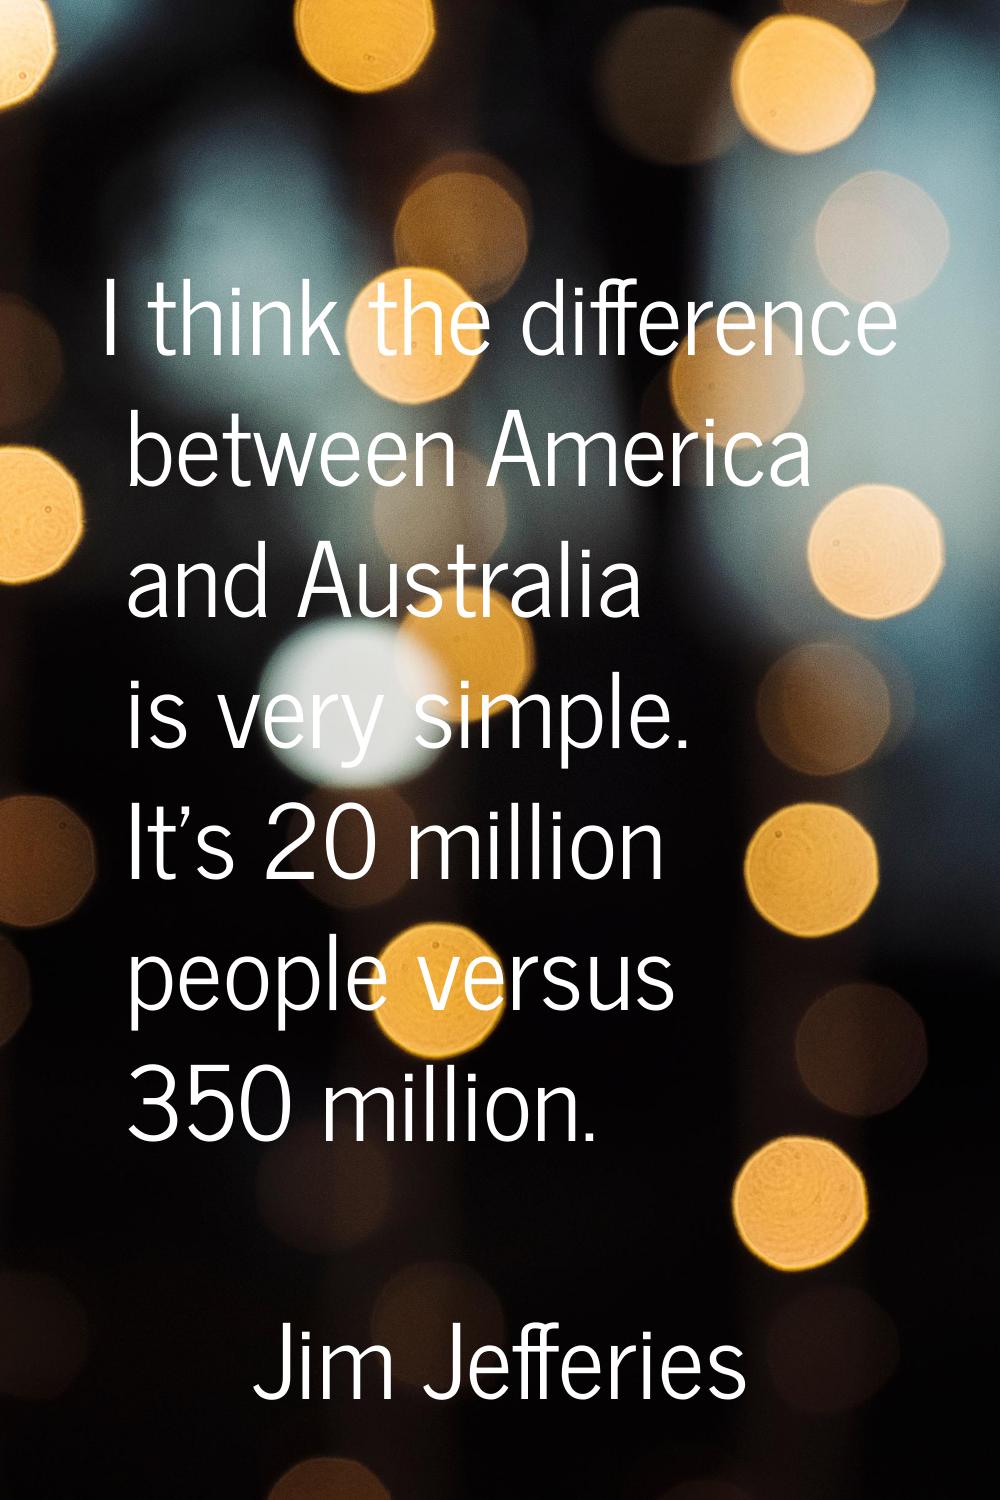 I think the difference between America and Australia is very simple. It's 20 million people versus 